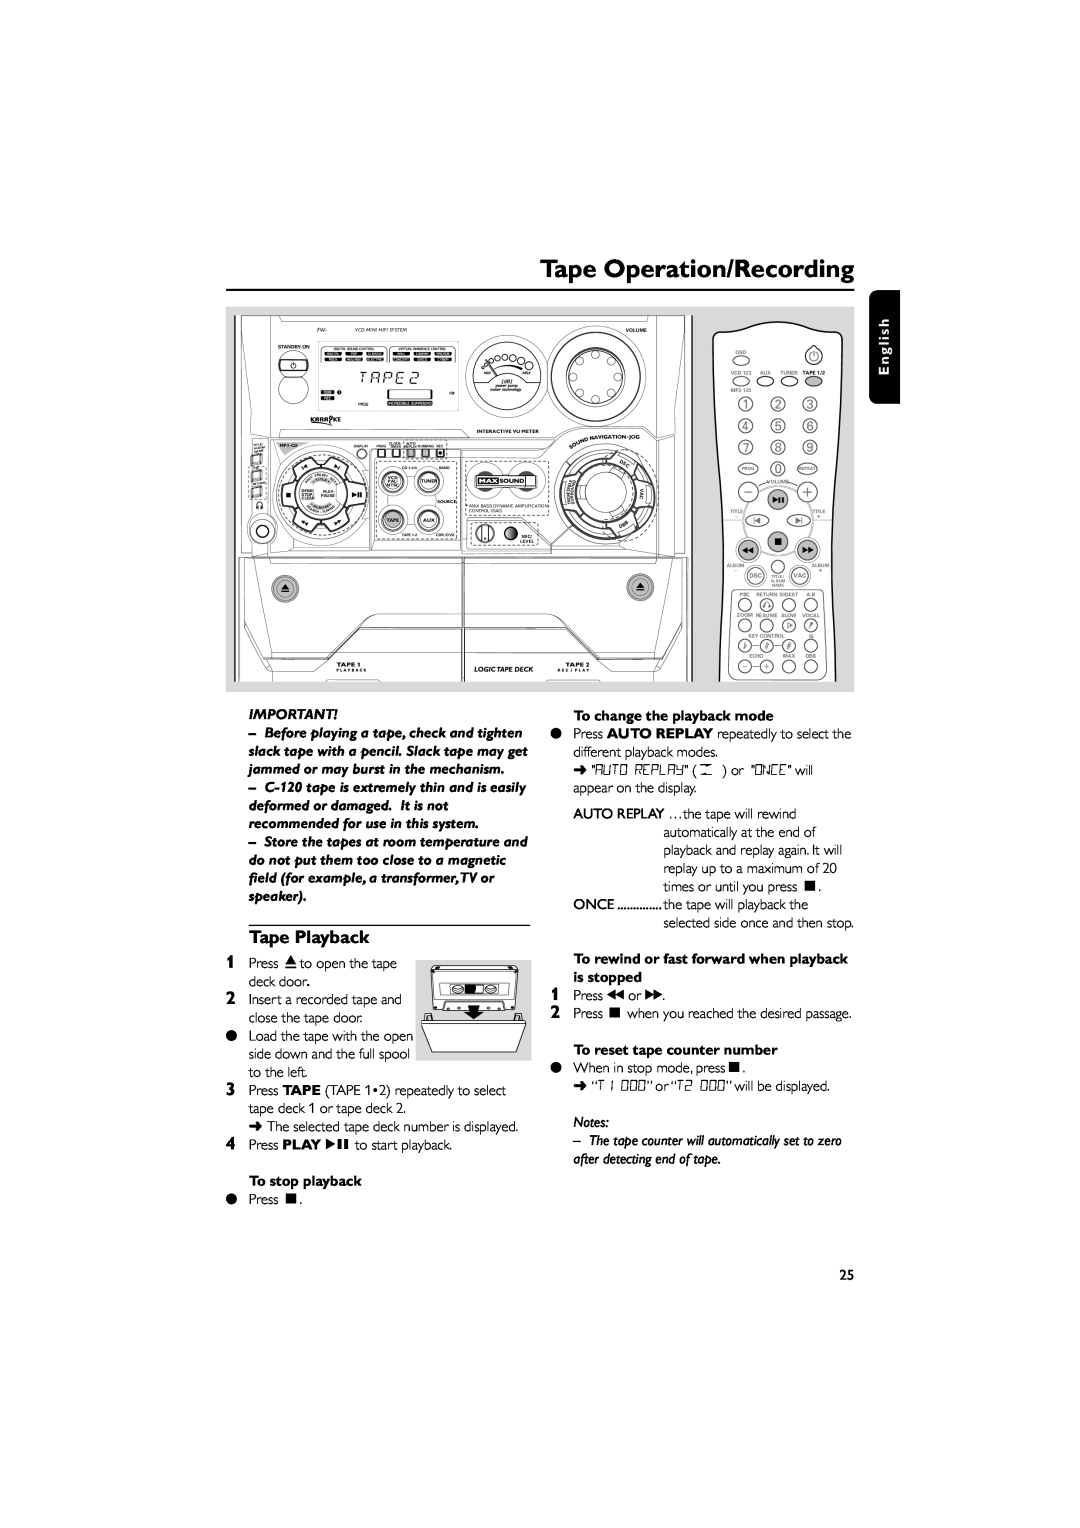 Philips FWV595 manual Tape Operation/Recording, E n g l i s h, To stop playback, To change the playback mode 